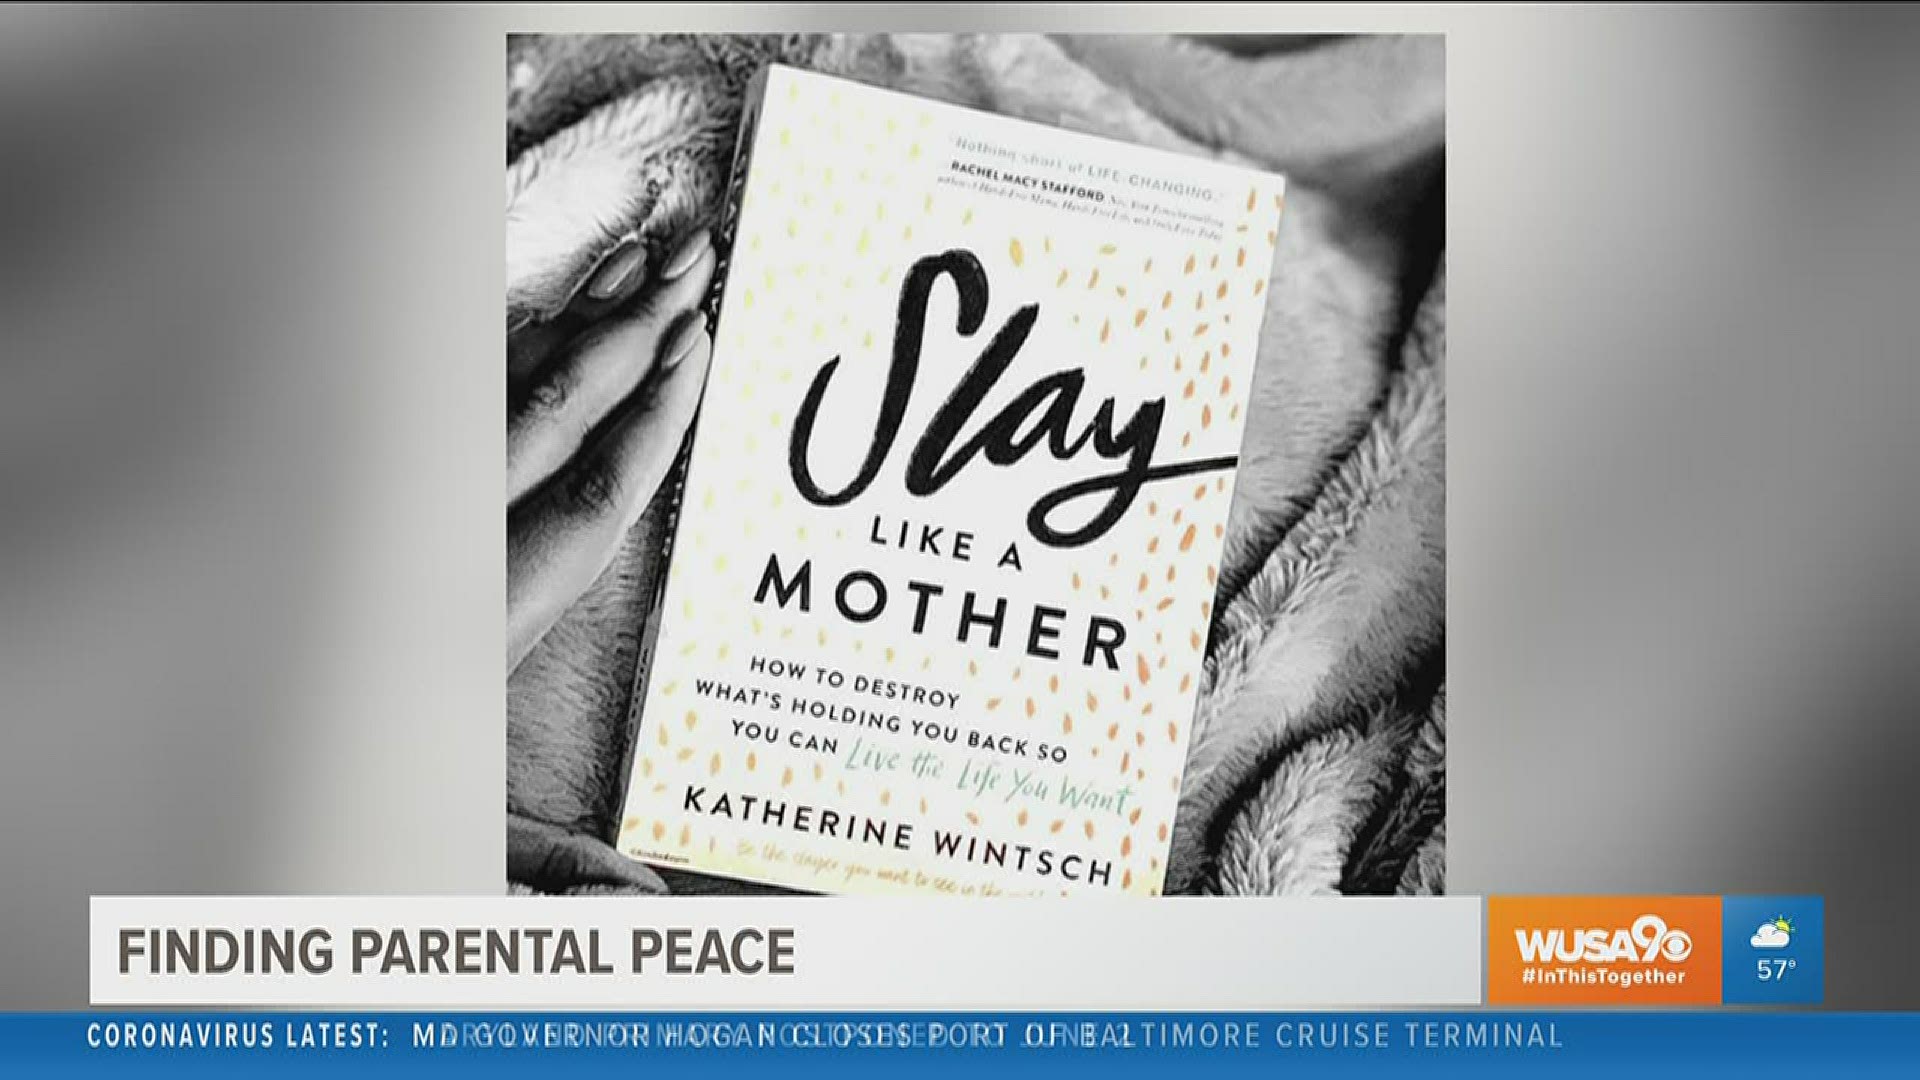 Modern motherhood expert Katherine Wintsch shares some tips on finding peace while the whole family is stuck at home.